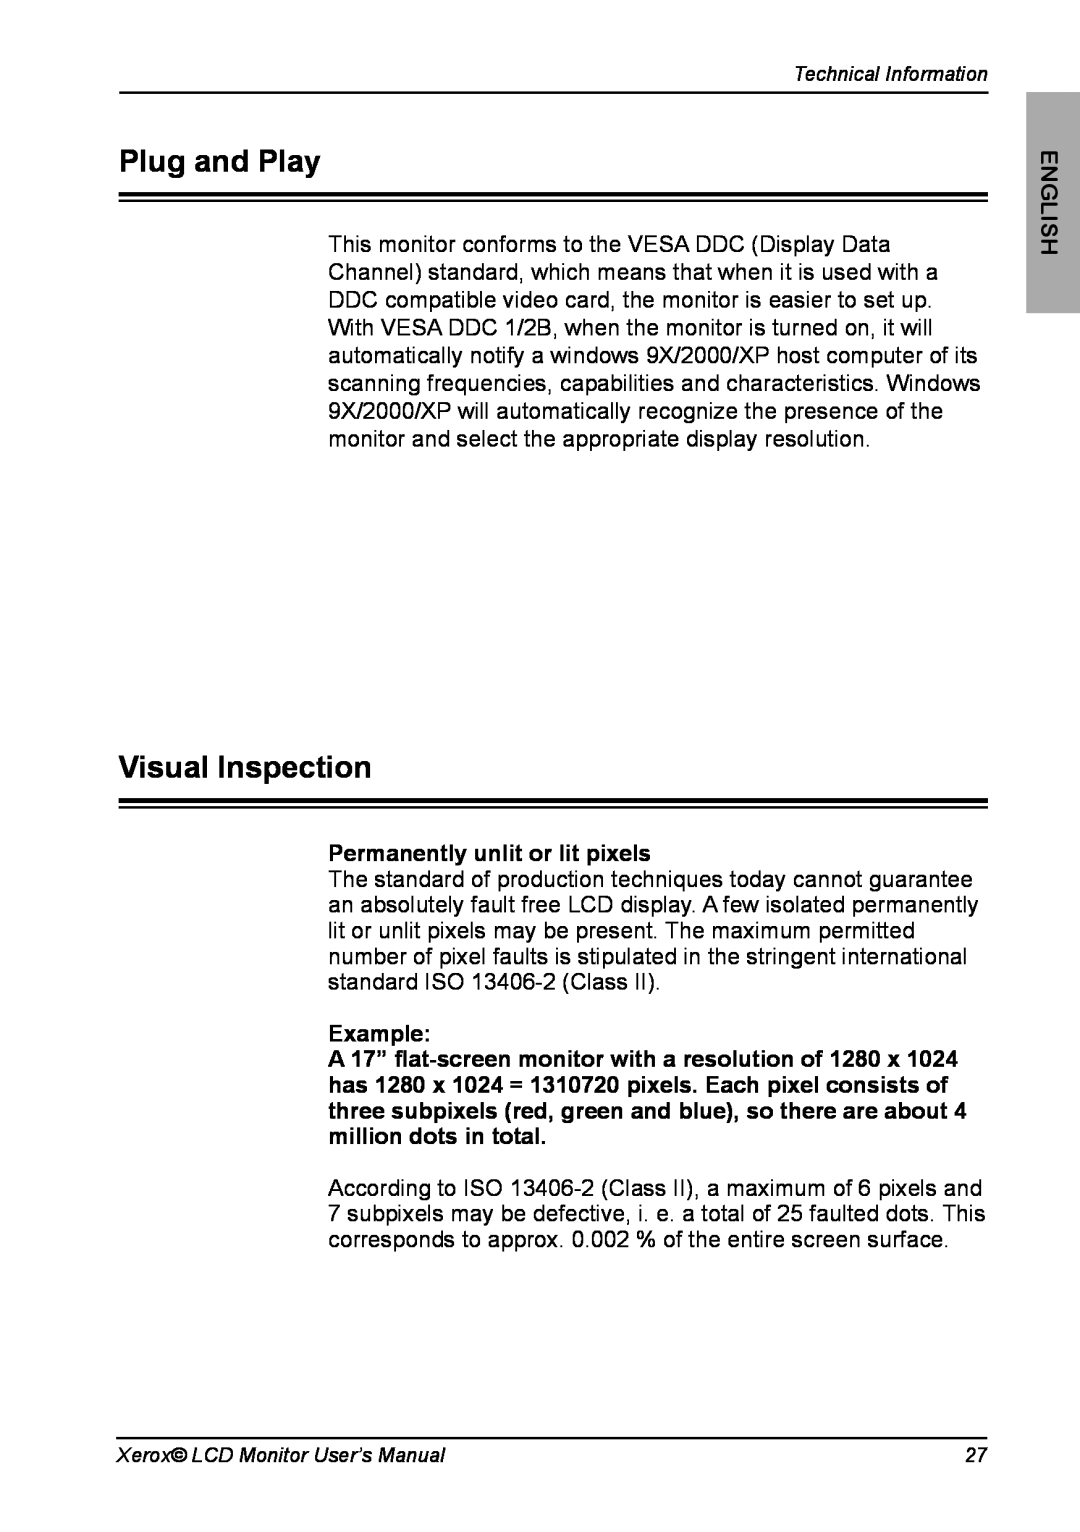 Xerox XM3-19w Plug and Play, Visual Inspection, Permanently unlit or lit pixels, Example, English, Technical Information 